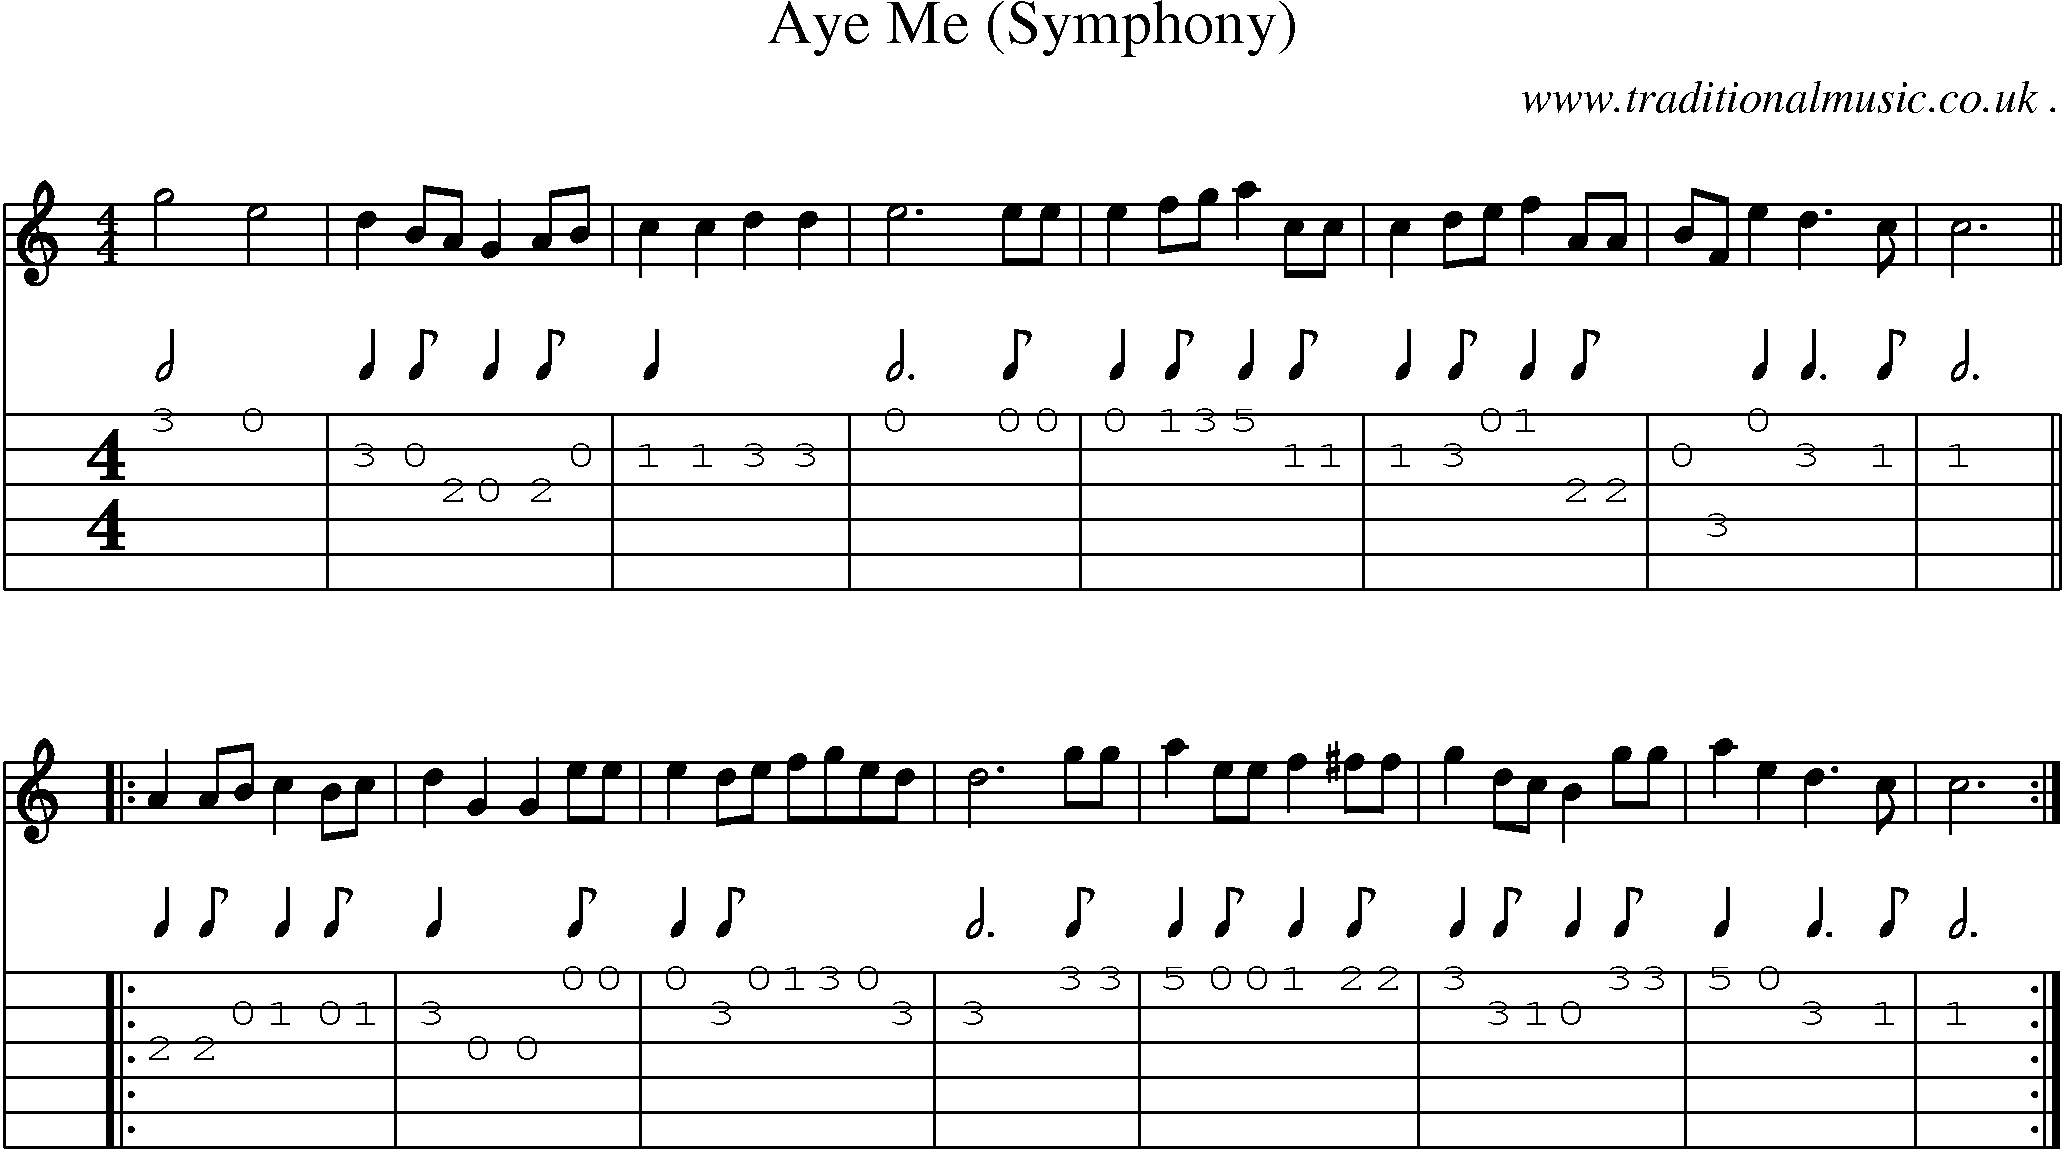 Sheet-Music and Guitar Tabs for Aye Me (symphony)